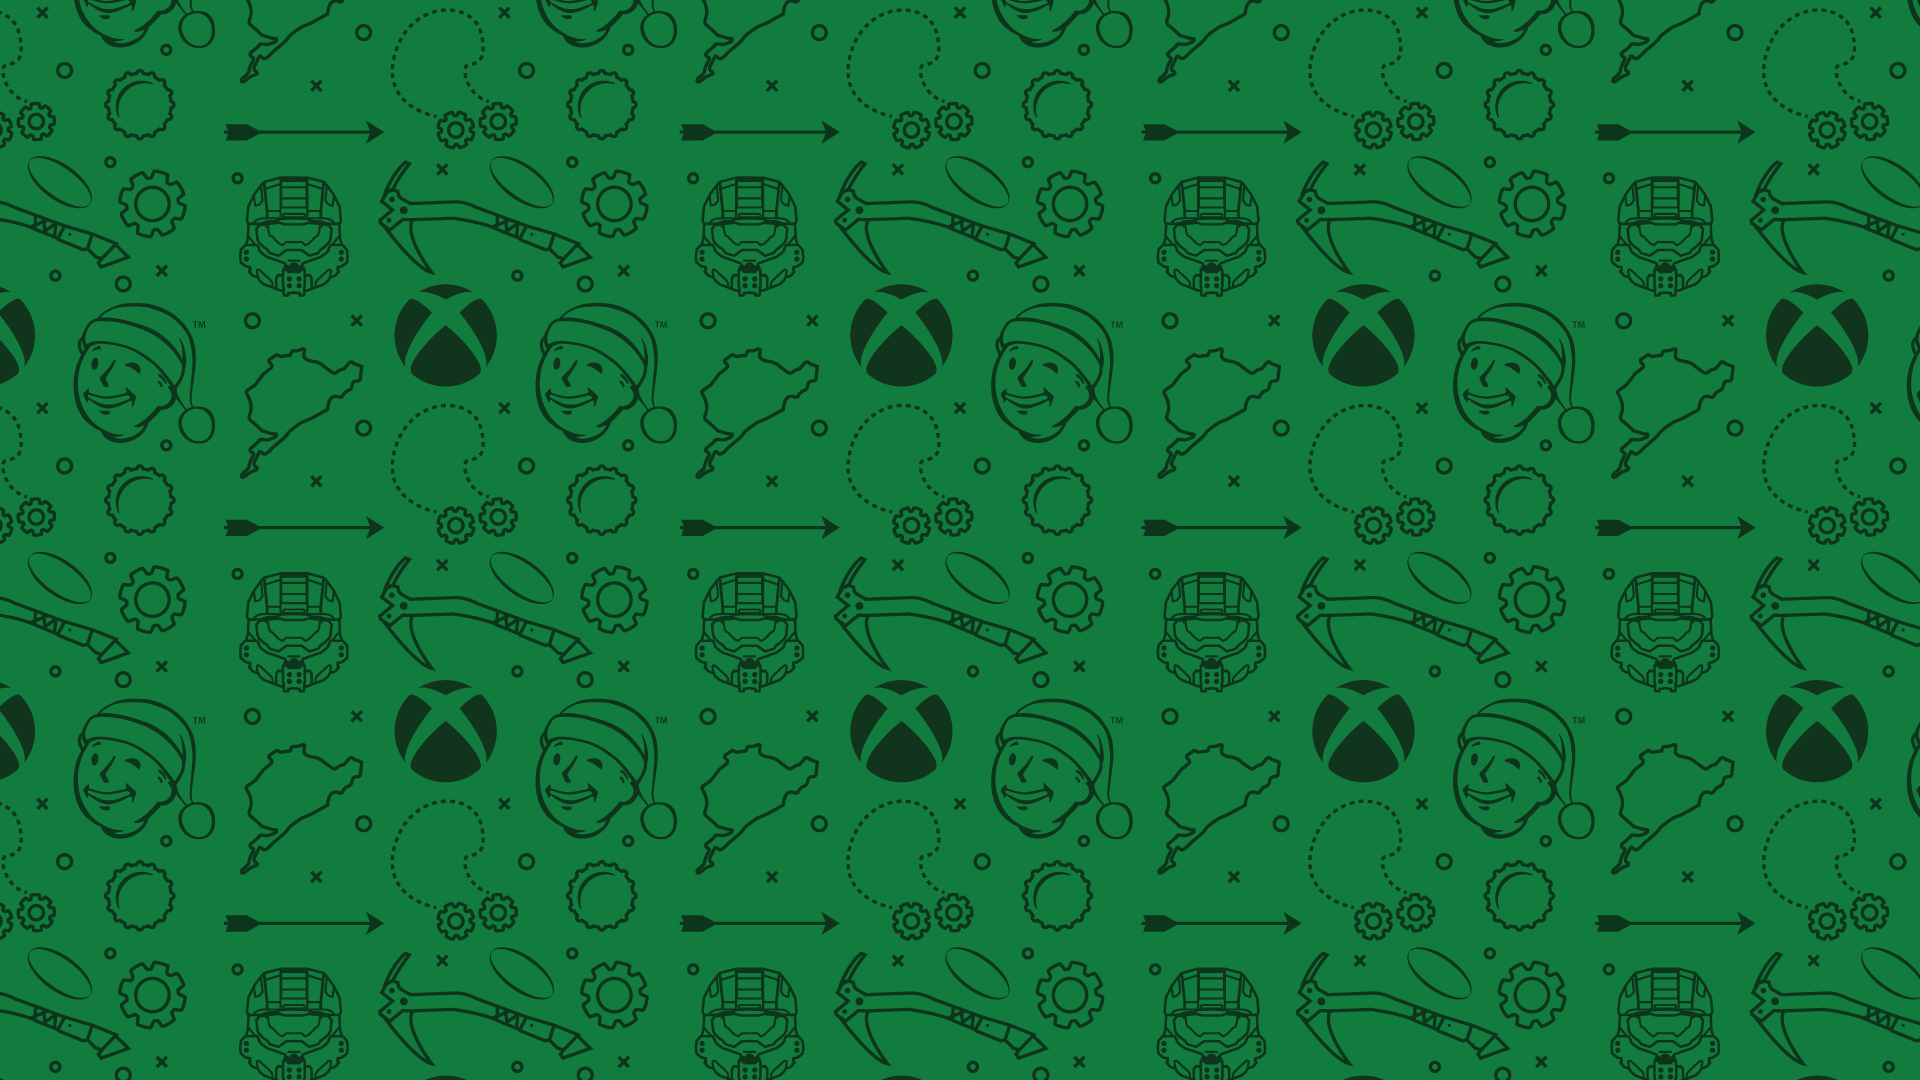 1920x1080 Check out these awesome festive-themed wallpapers for your Xbox One AR12Gaming